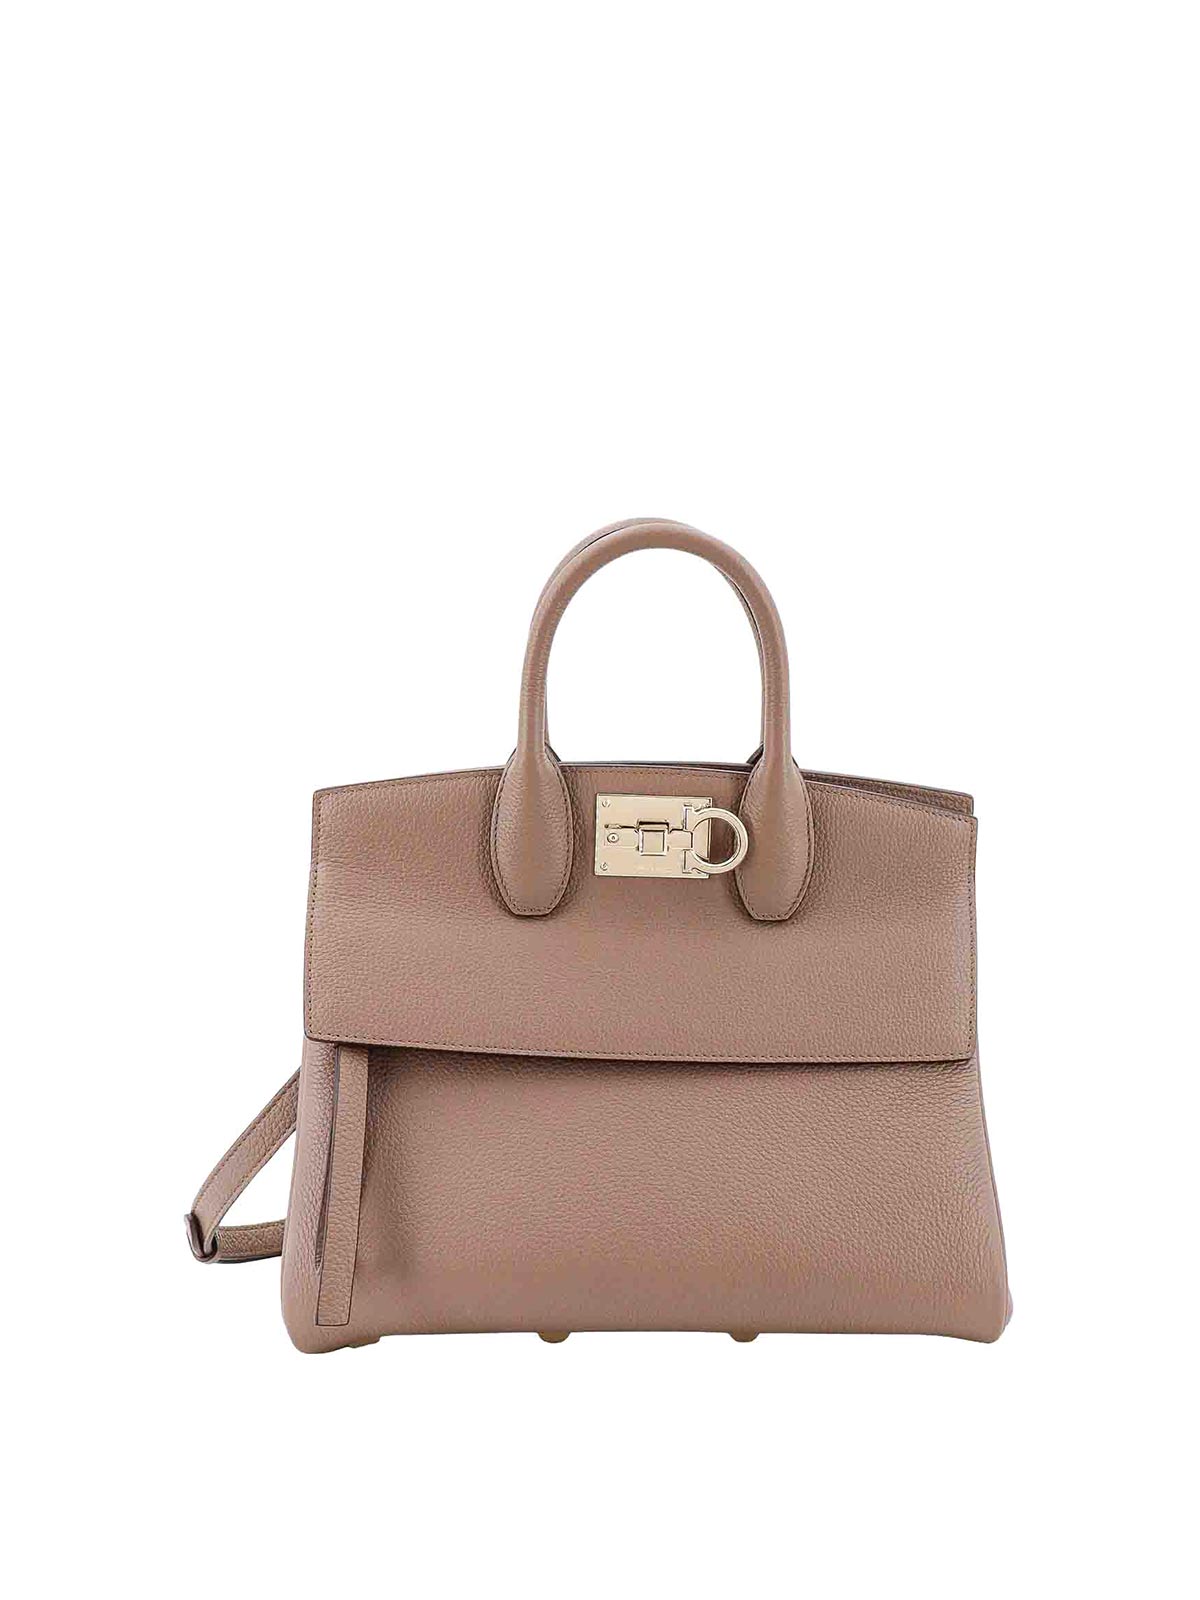 Ferragamo Leather Handbag With Iconic Gancini Detail In Brown